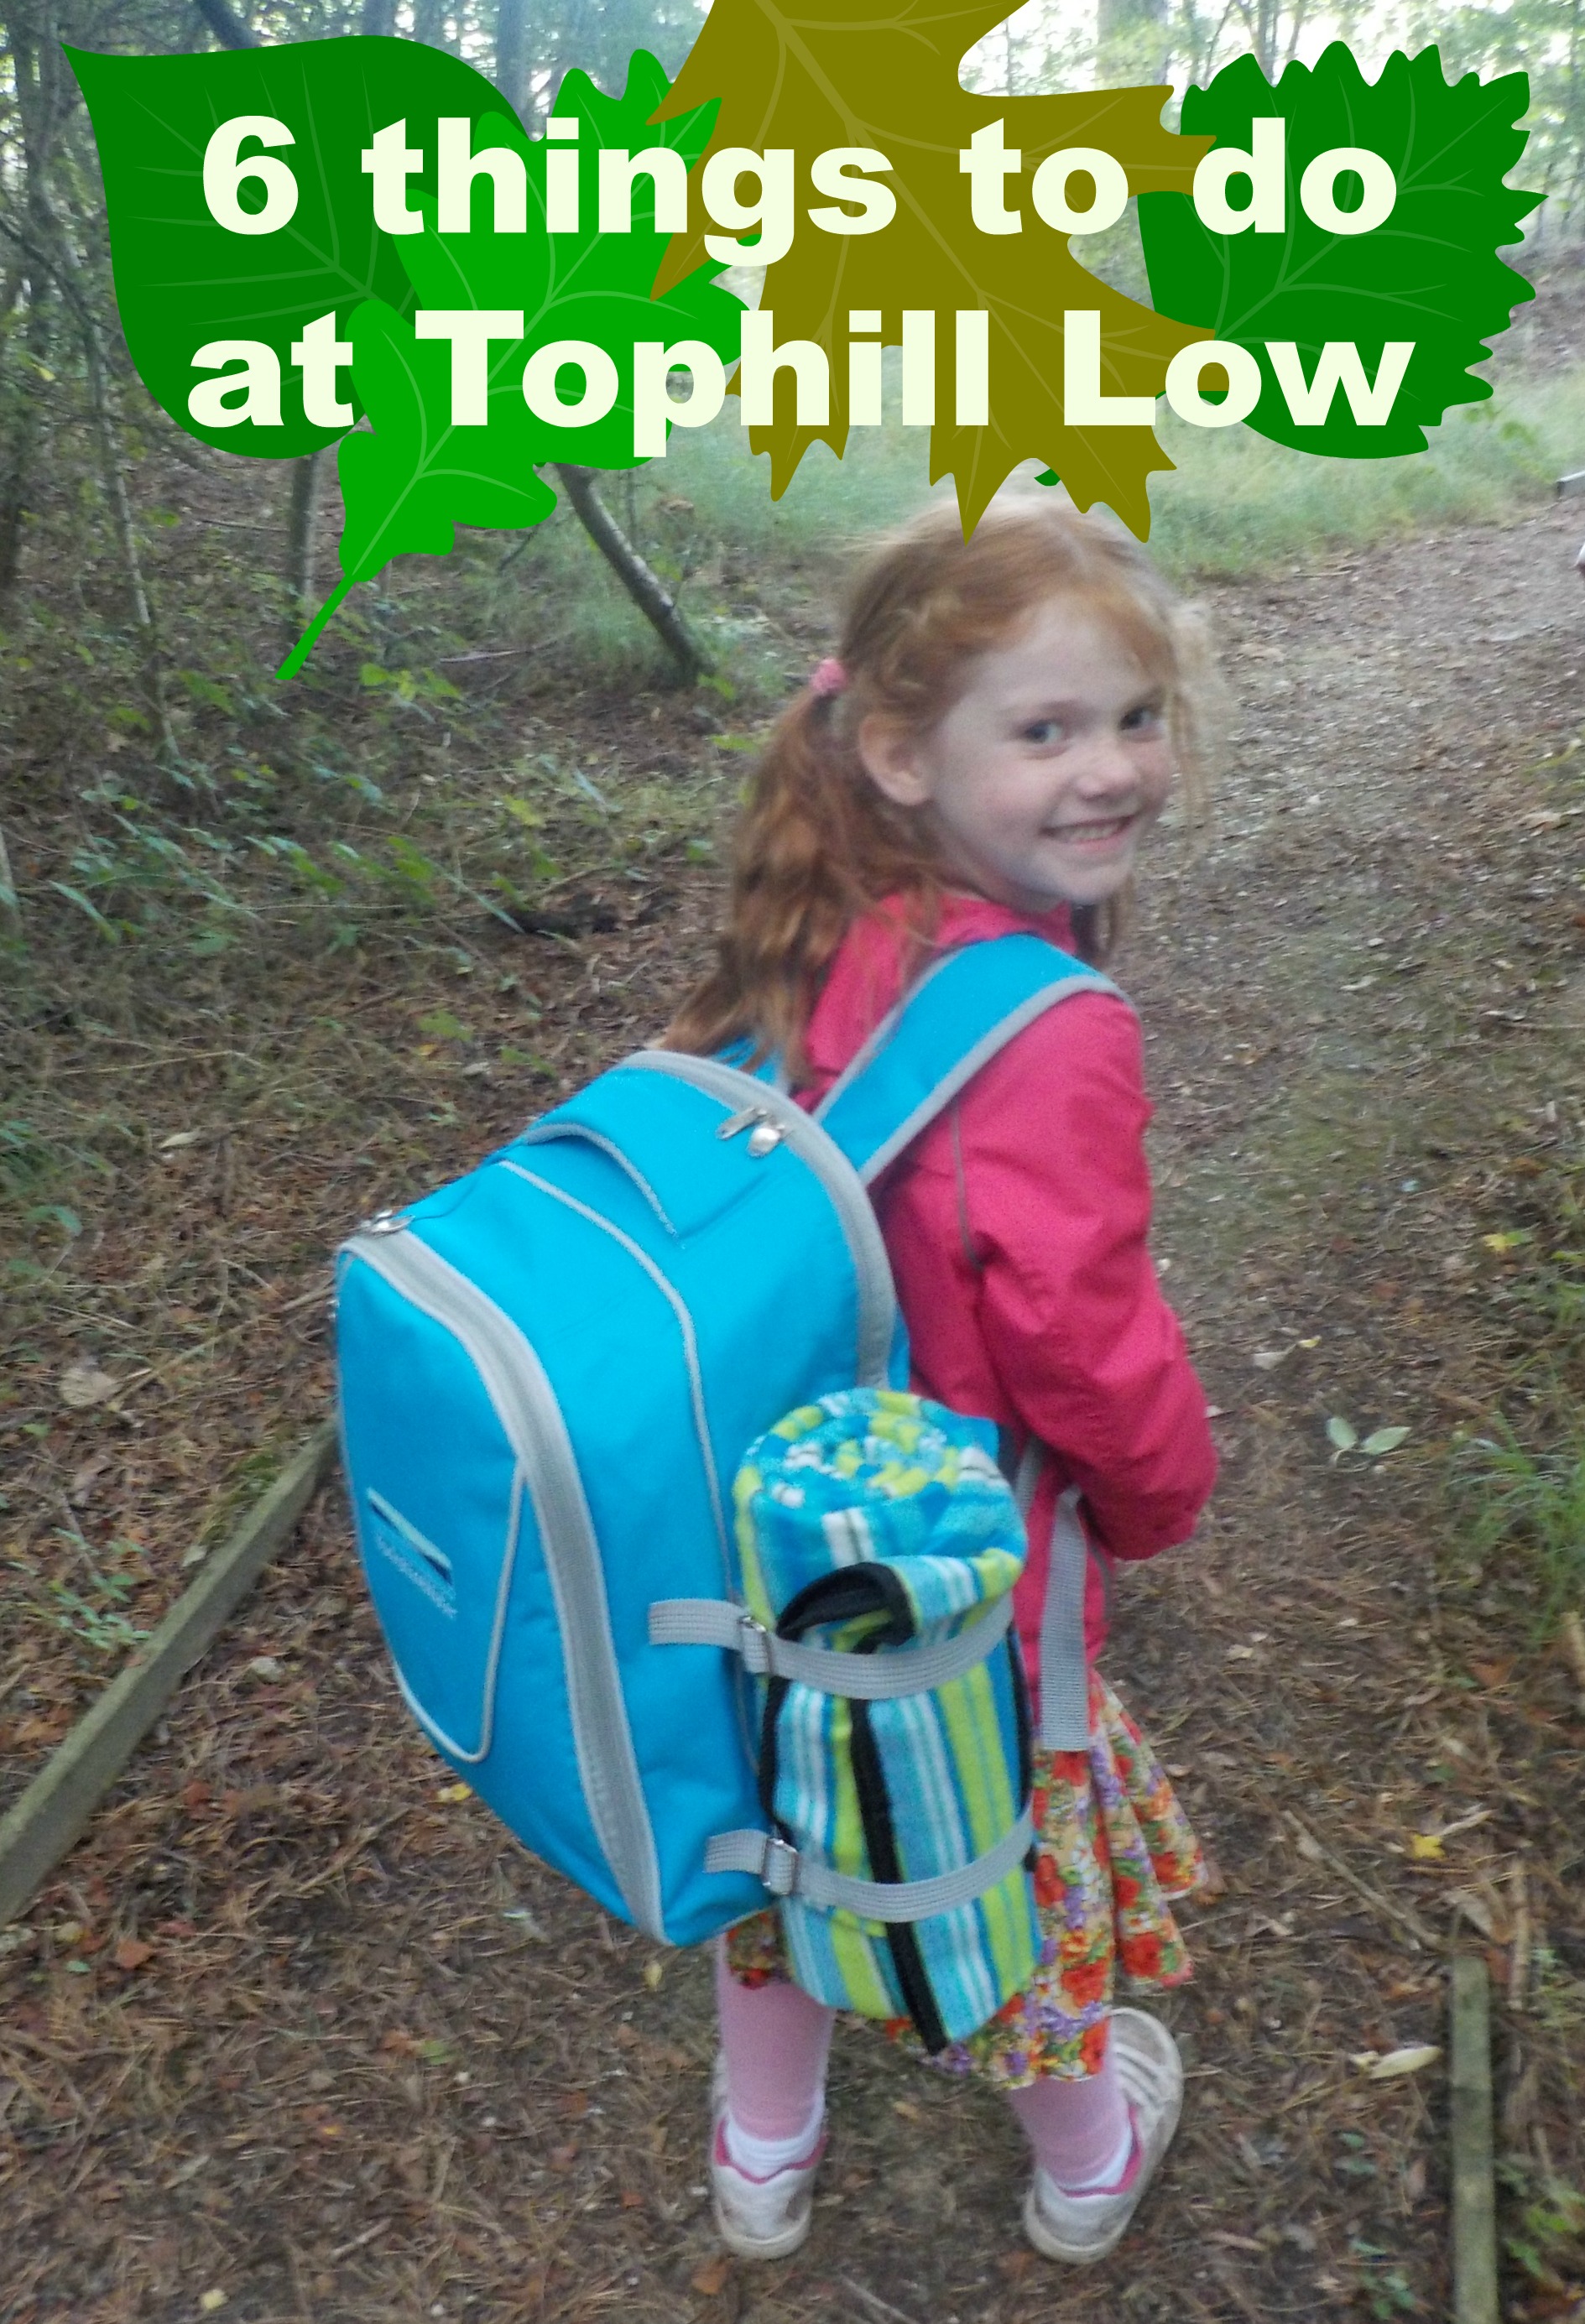 6 Things to do at Tophill Low